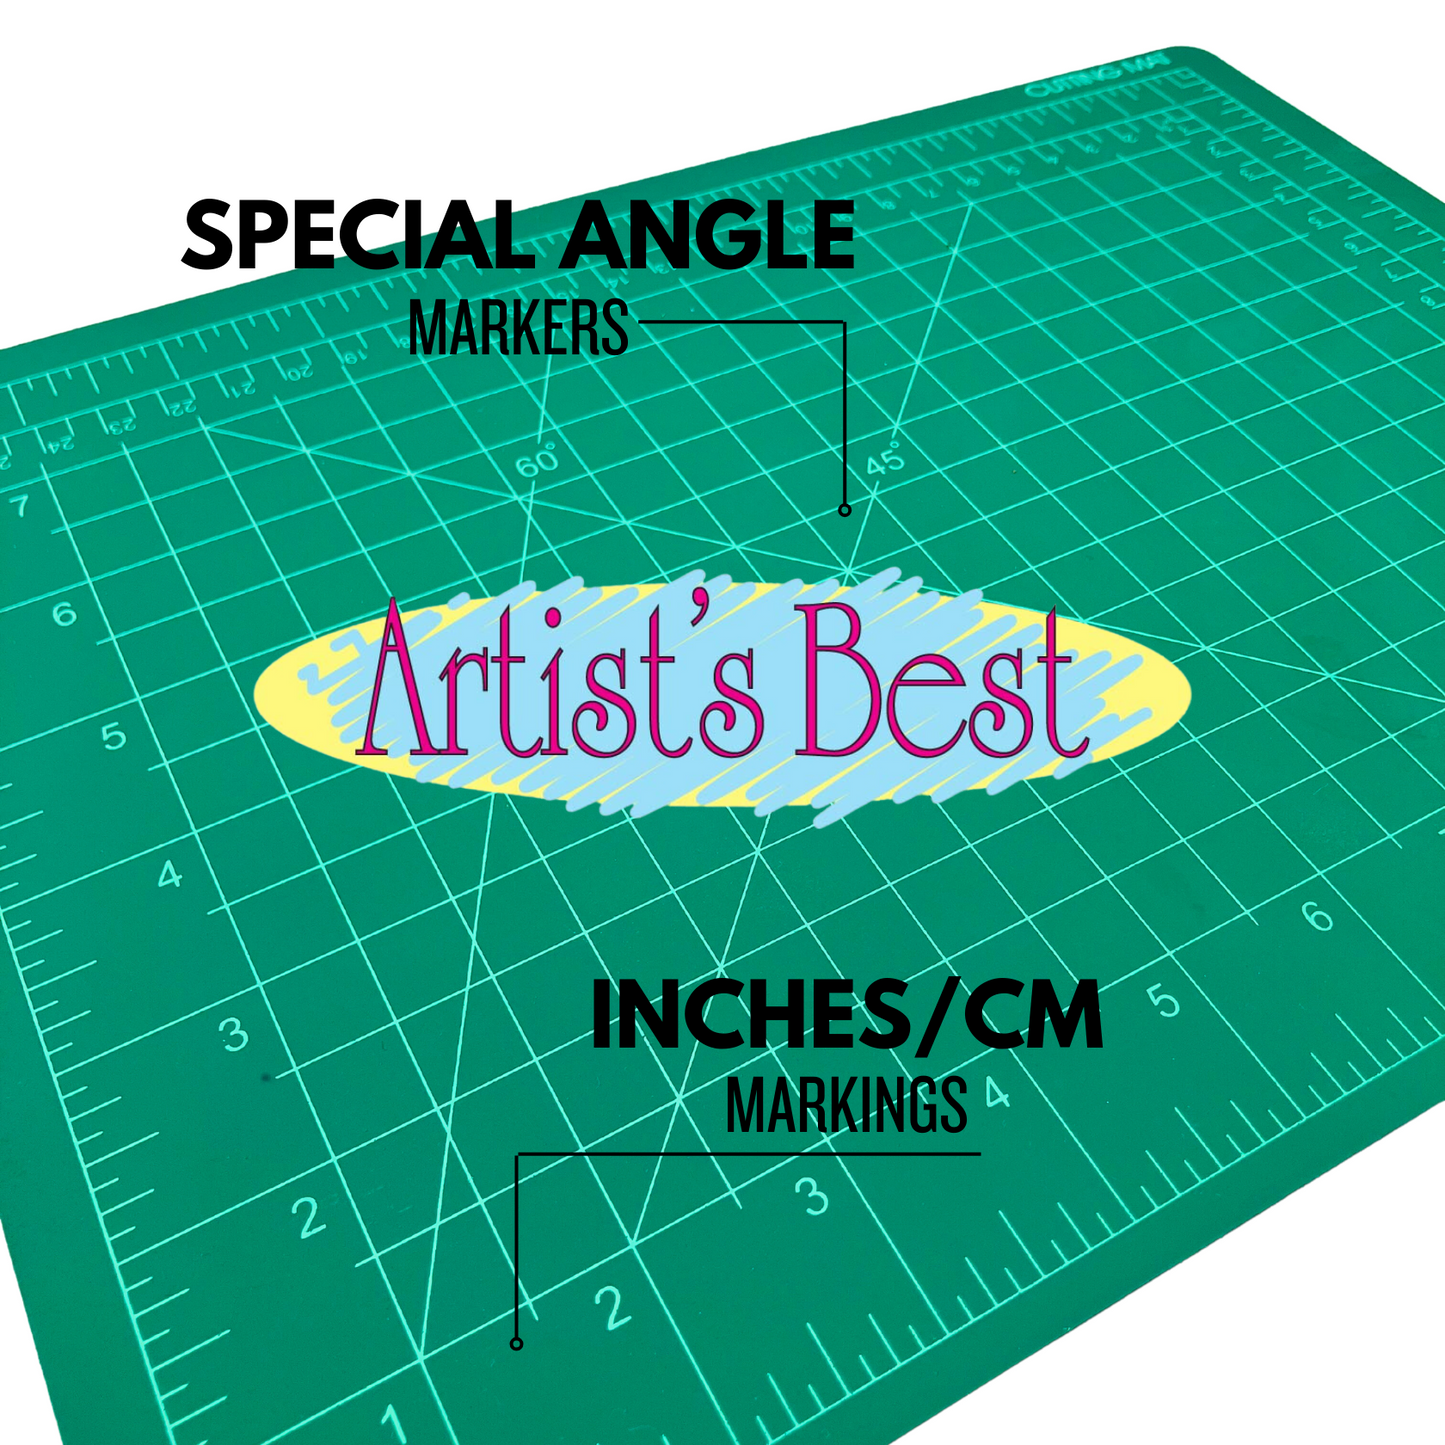 9x12 Inch Green Cutting Mat with Pre-Marked Grid Lines  - CR-91912